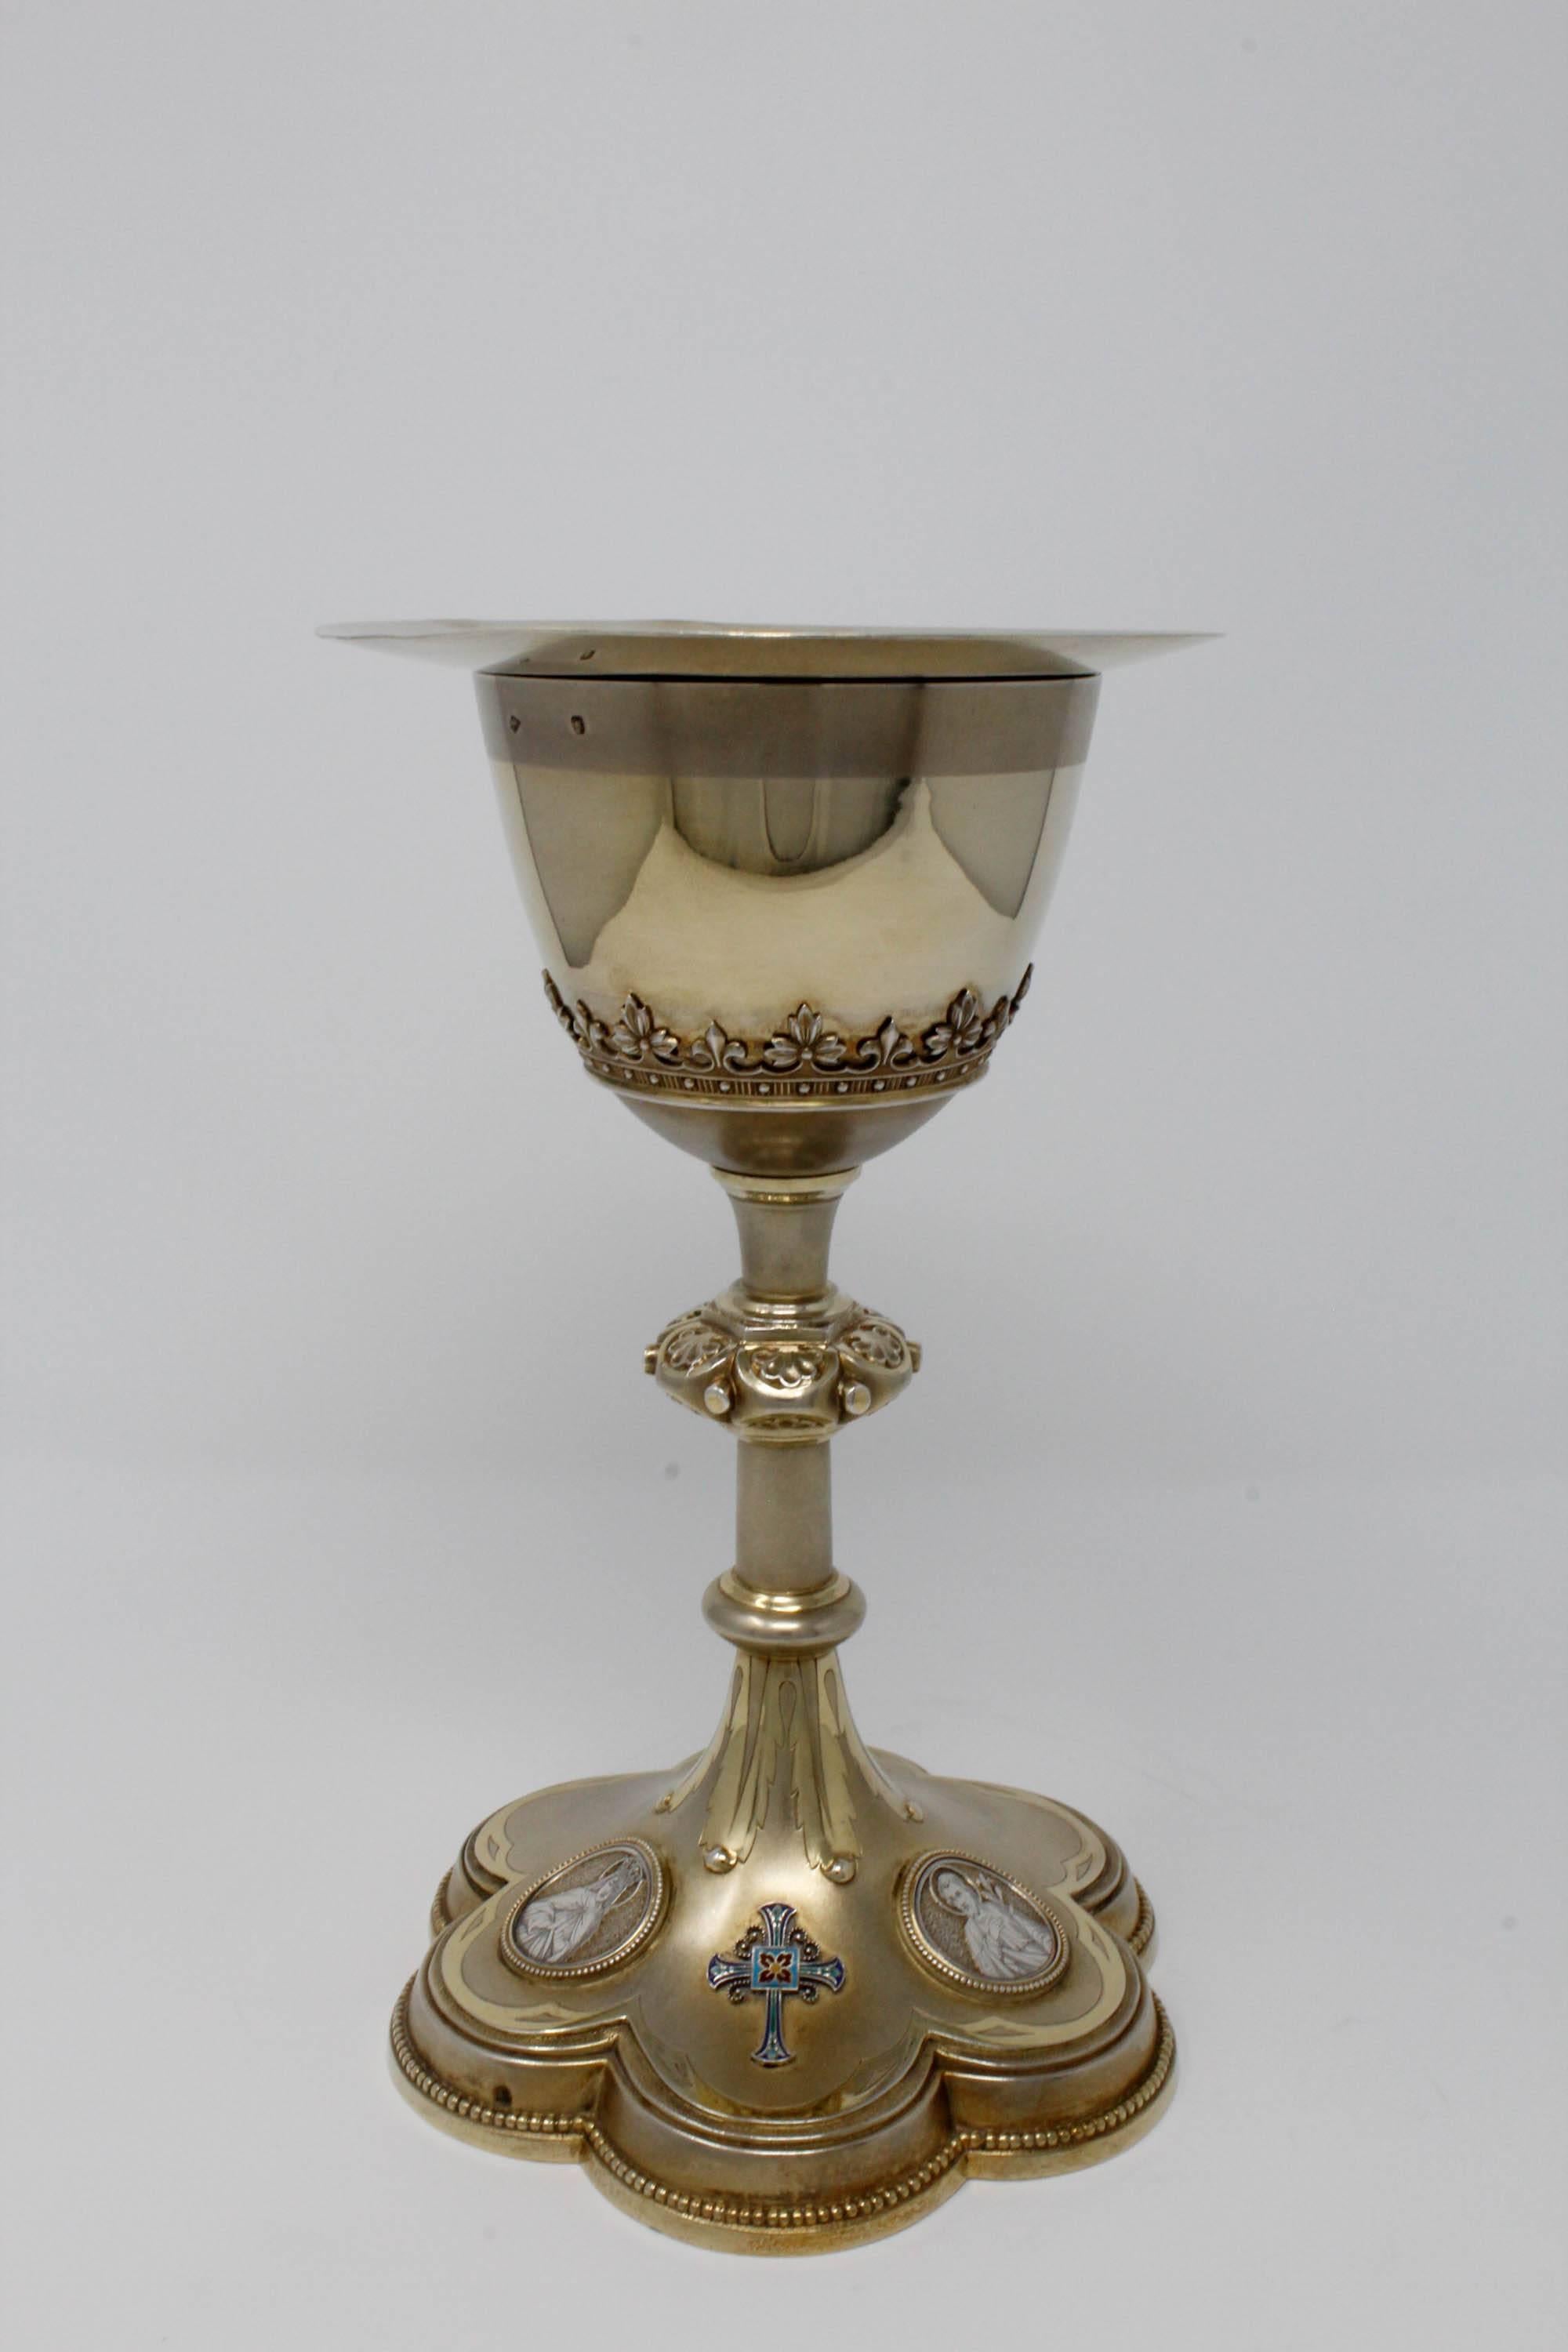 Chalice, Silver Gilt, D. Freres c.1880. The base is mounted with 3 engraved medallions & champleve enamel cross.

Material: Silver Gilt
Maker: D. Freces
Year: c.1880
Dimensions: 9